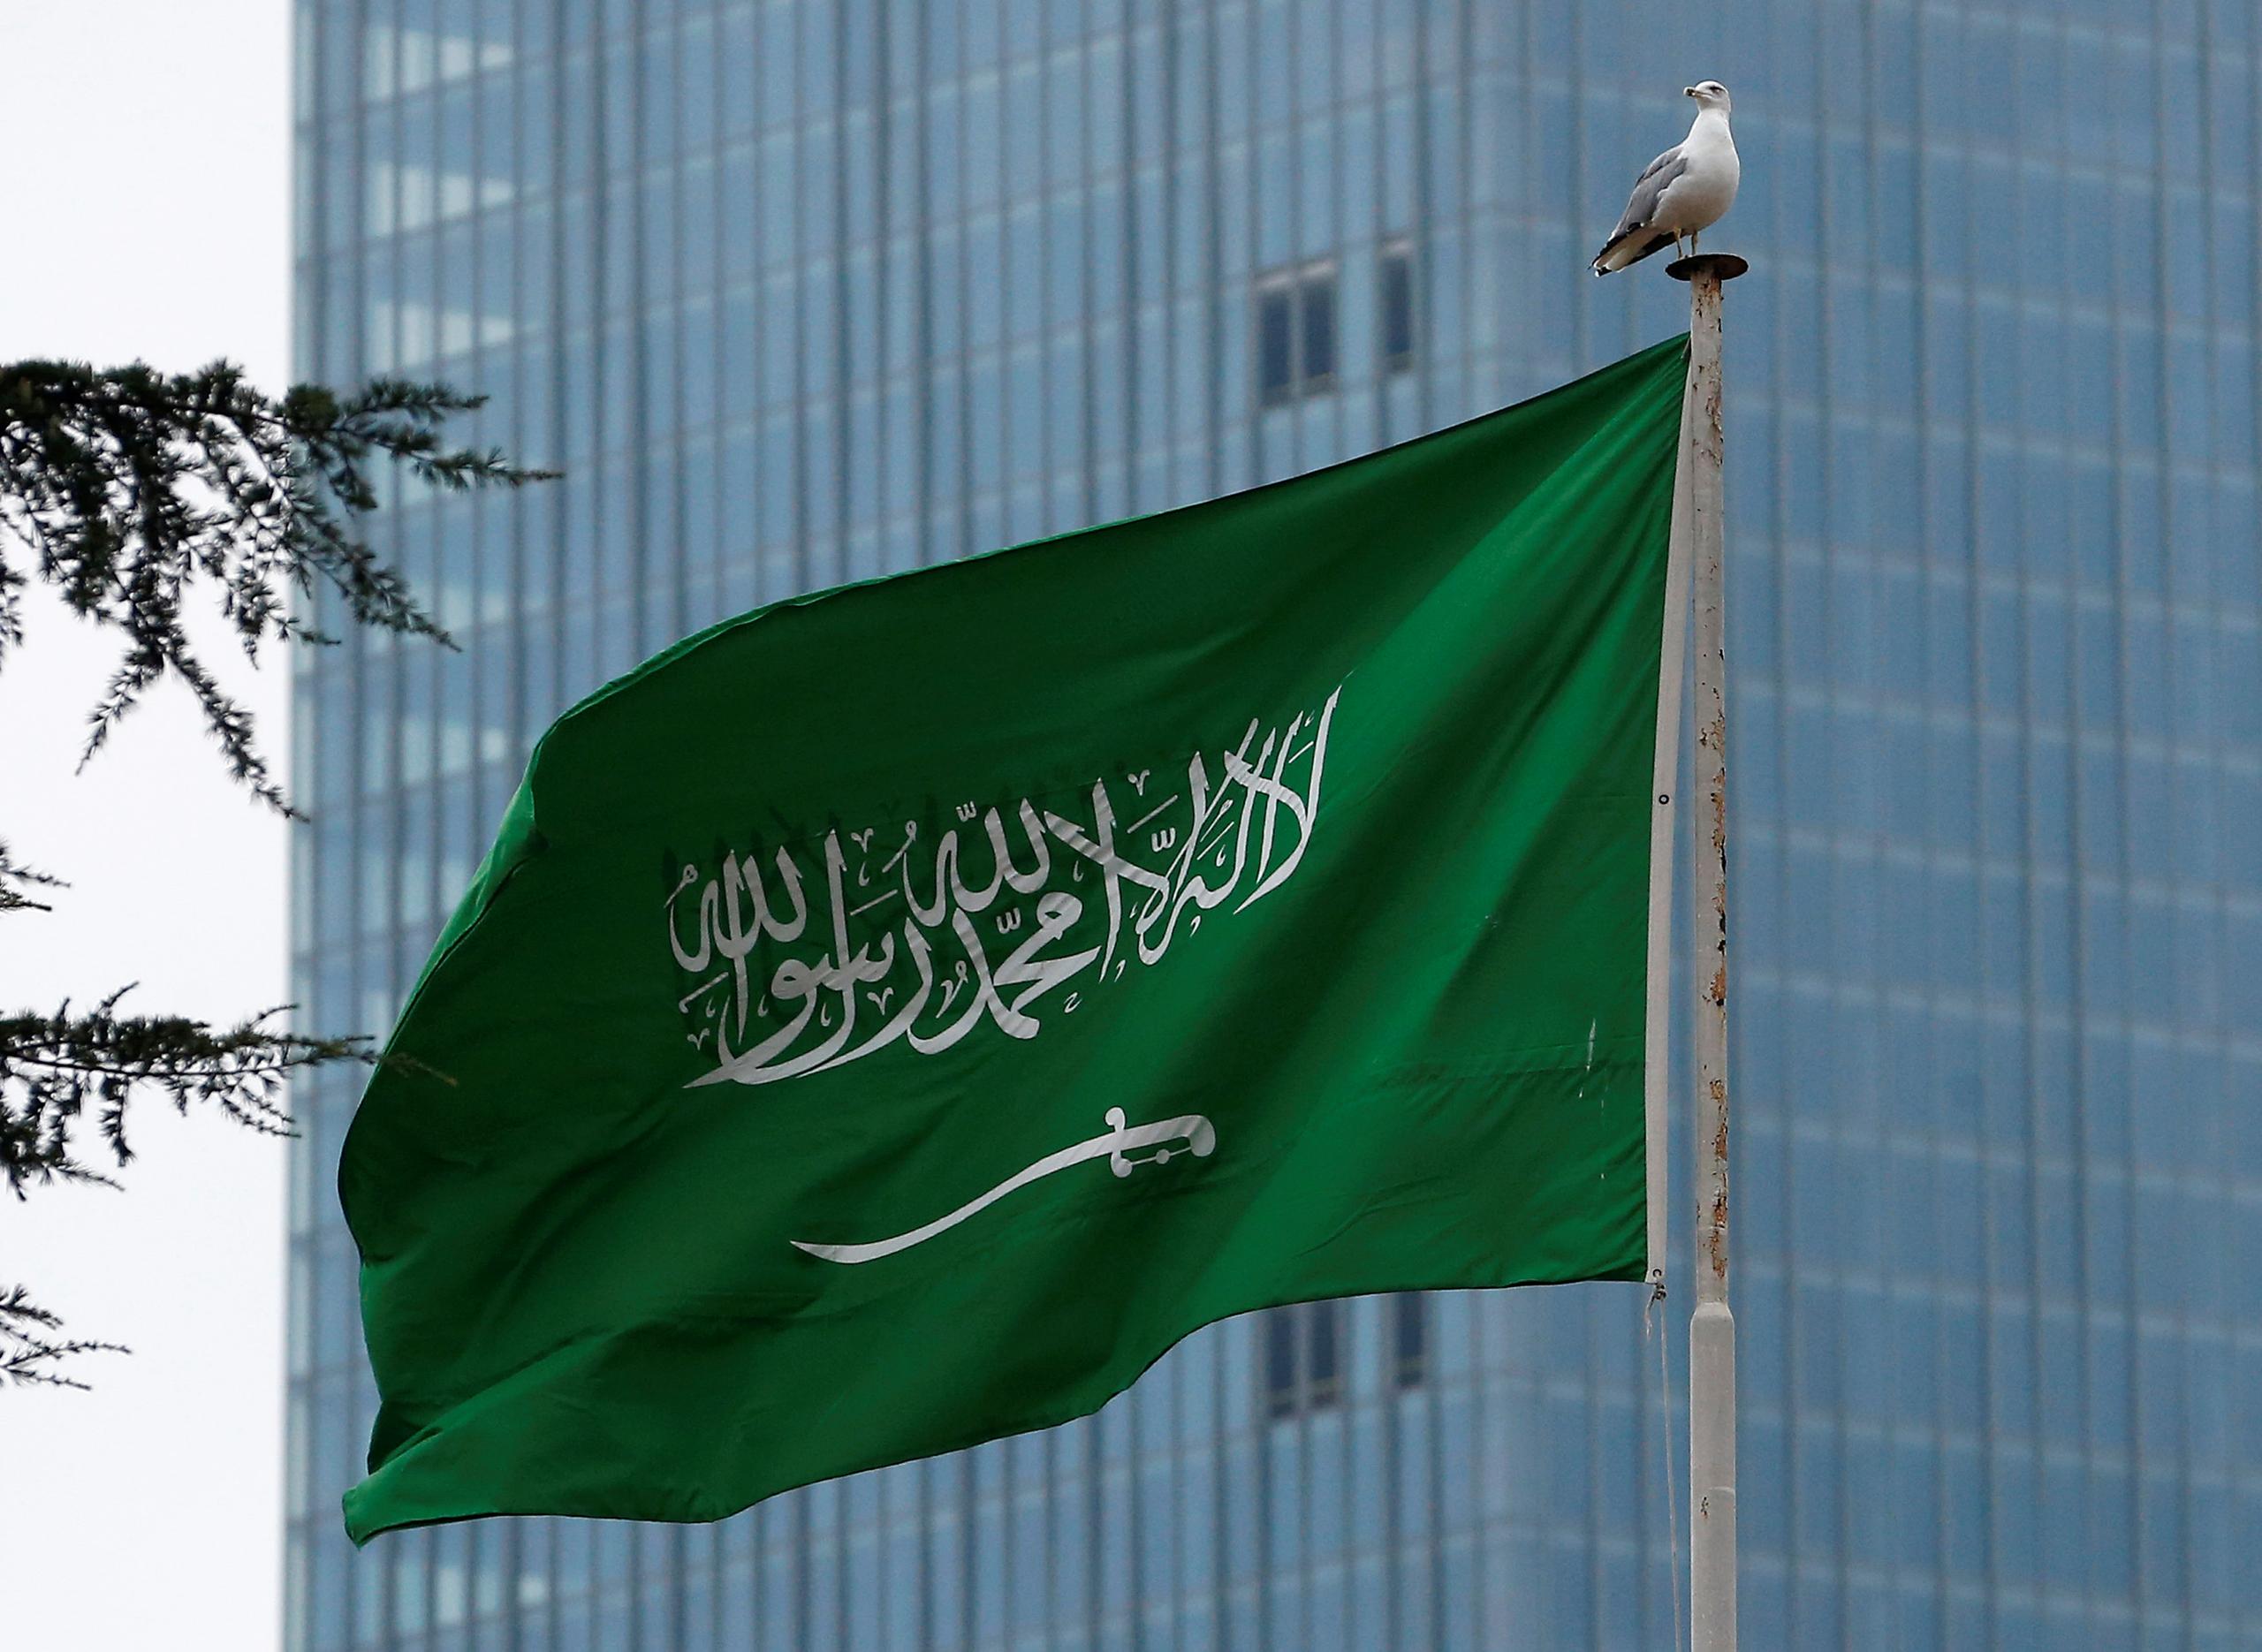 Saudi Arabia to end flogging as form of punishment: document